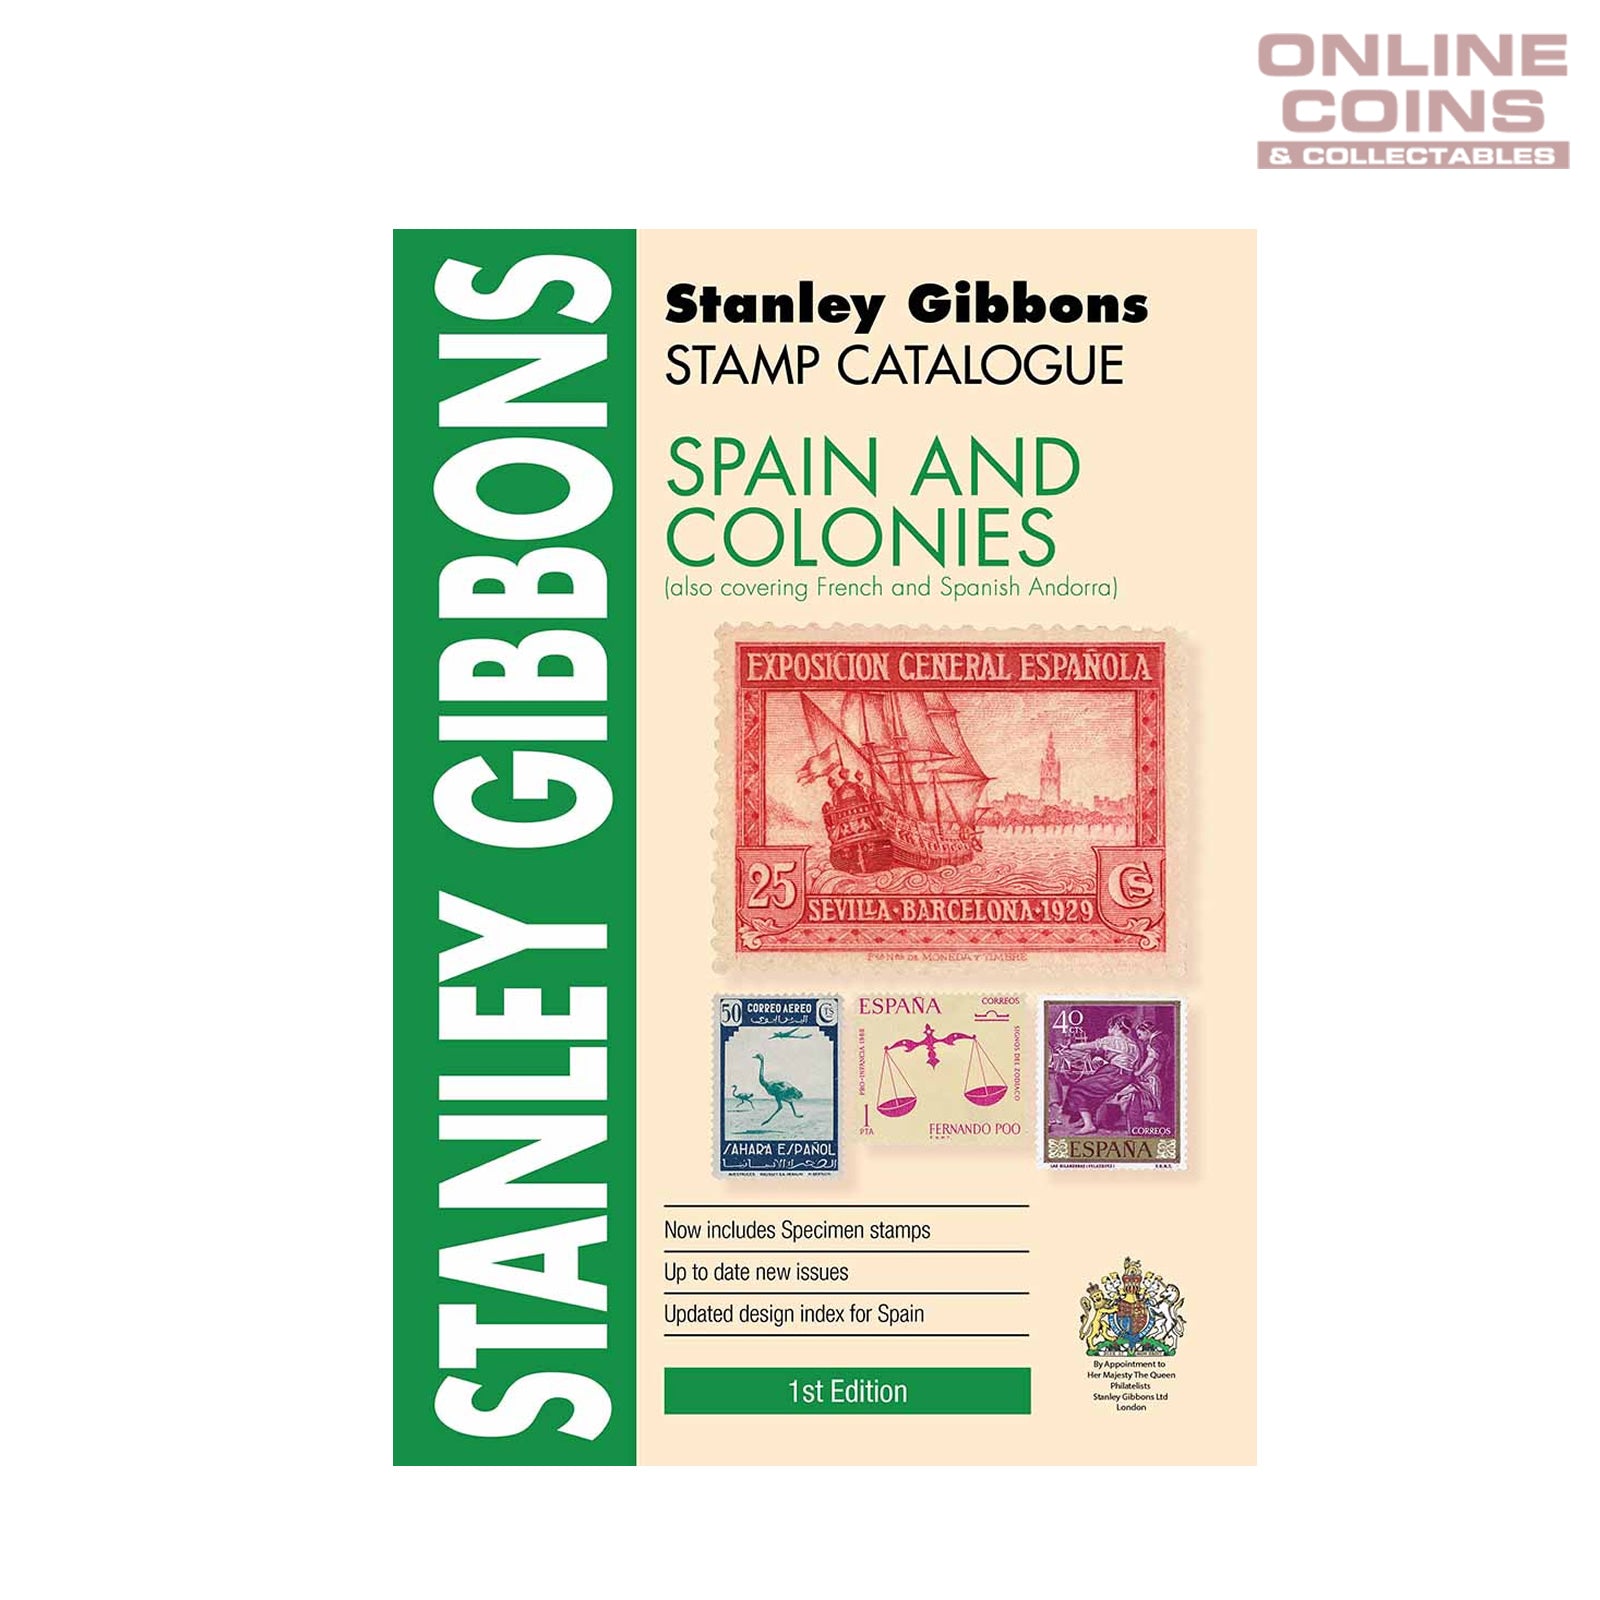 2019 Stanley Gibbons - Stamp Catalogue Spain and Colonies Soft Cover Book 1st Edition